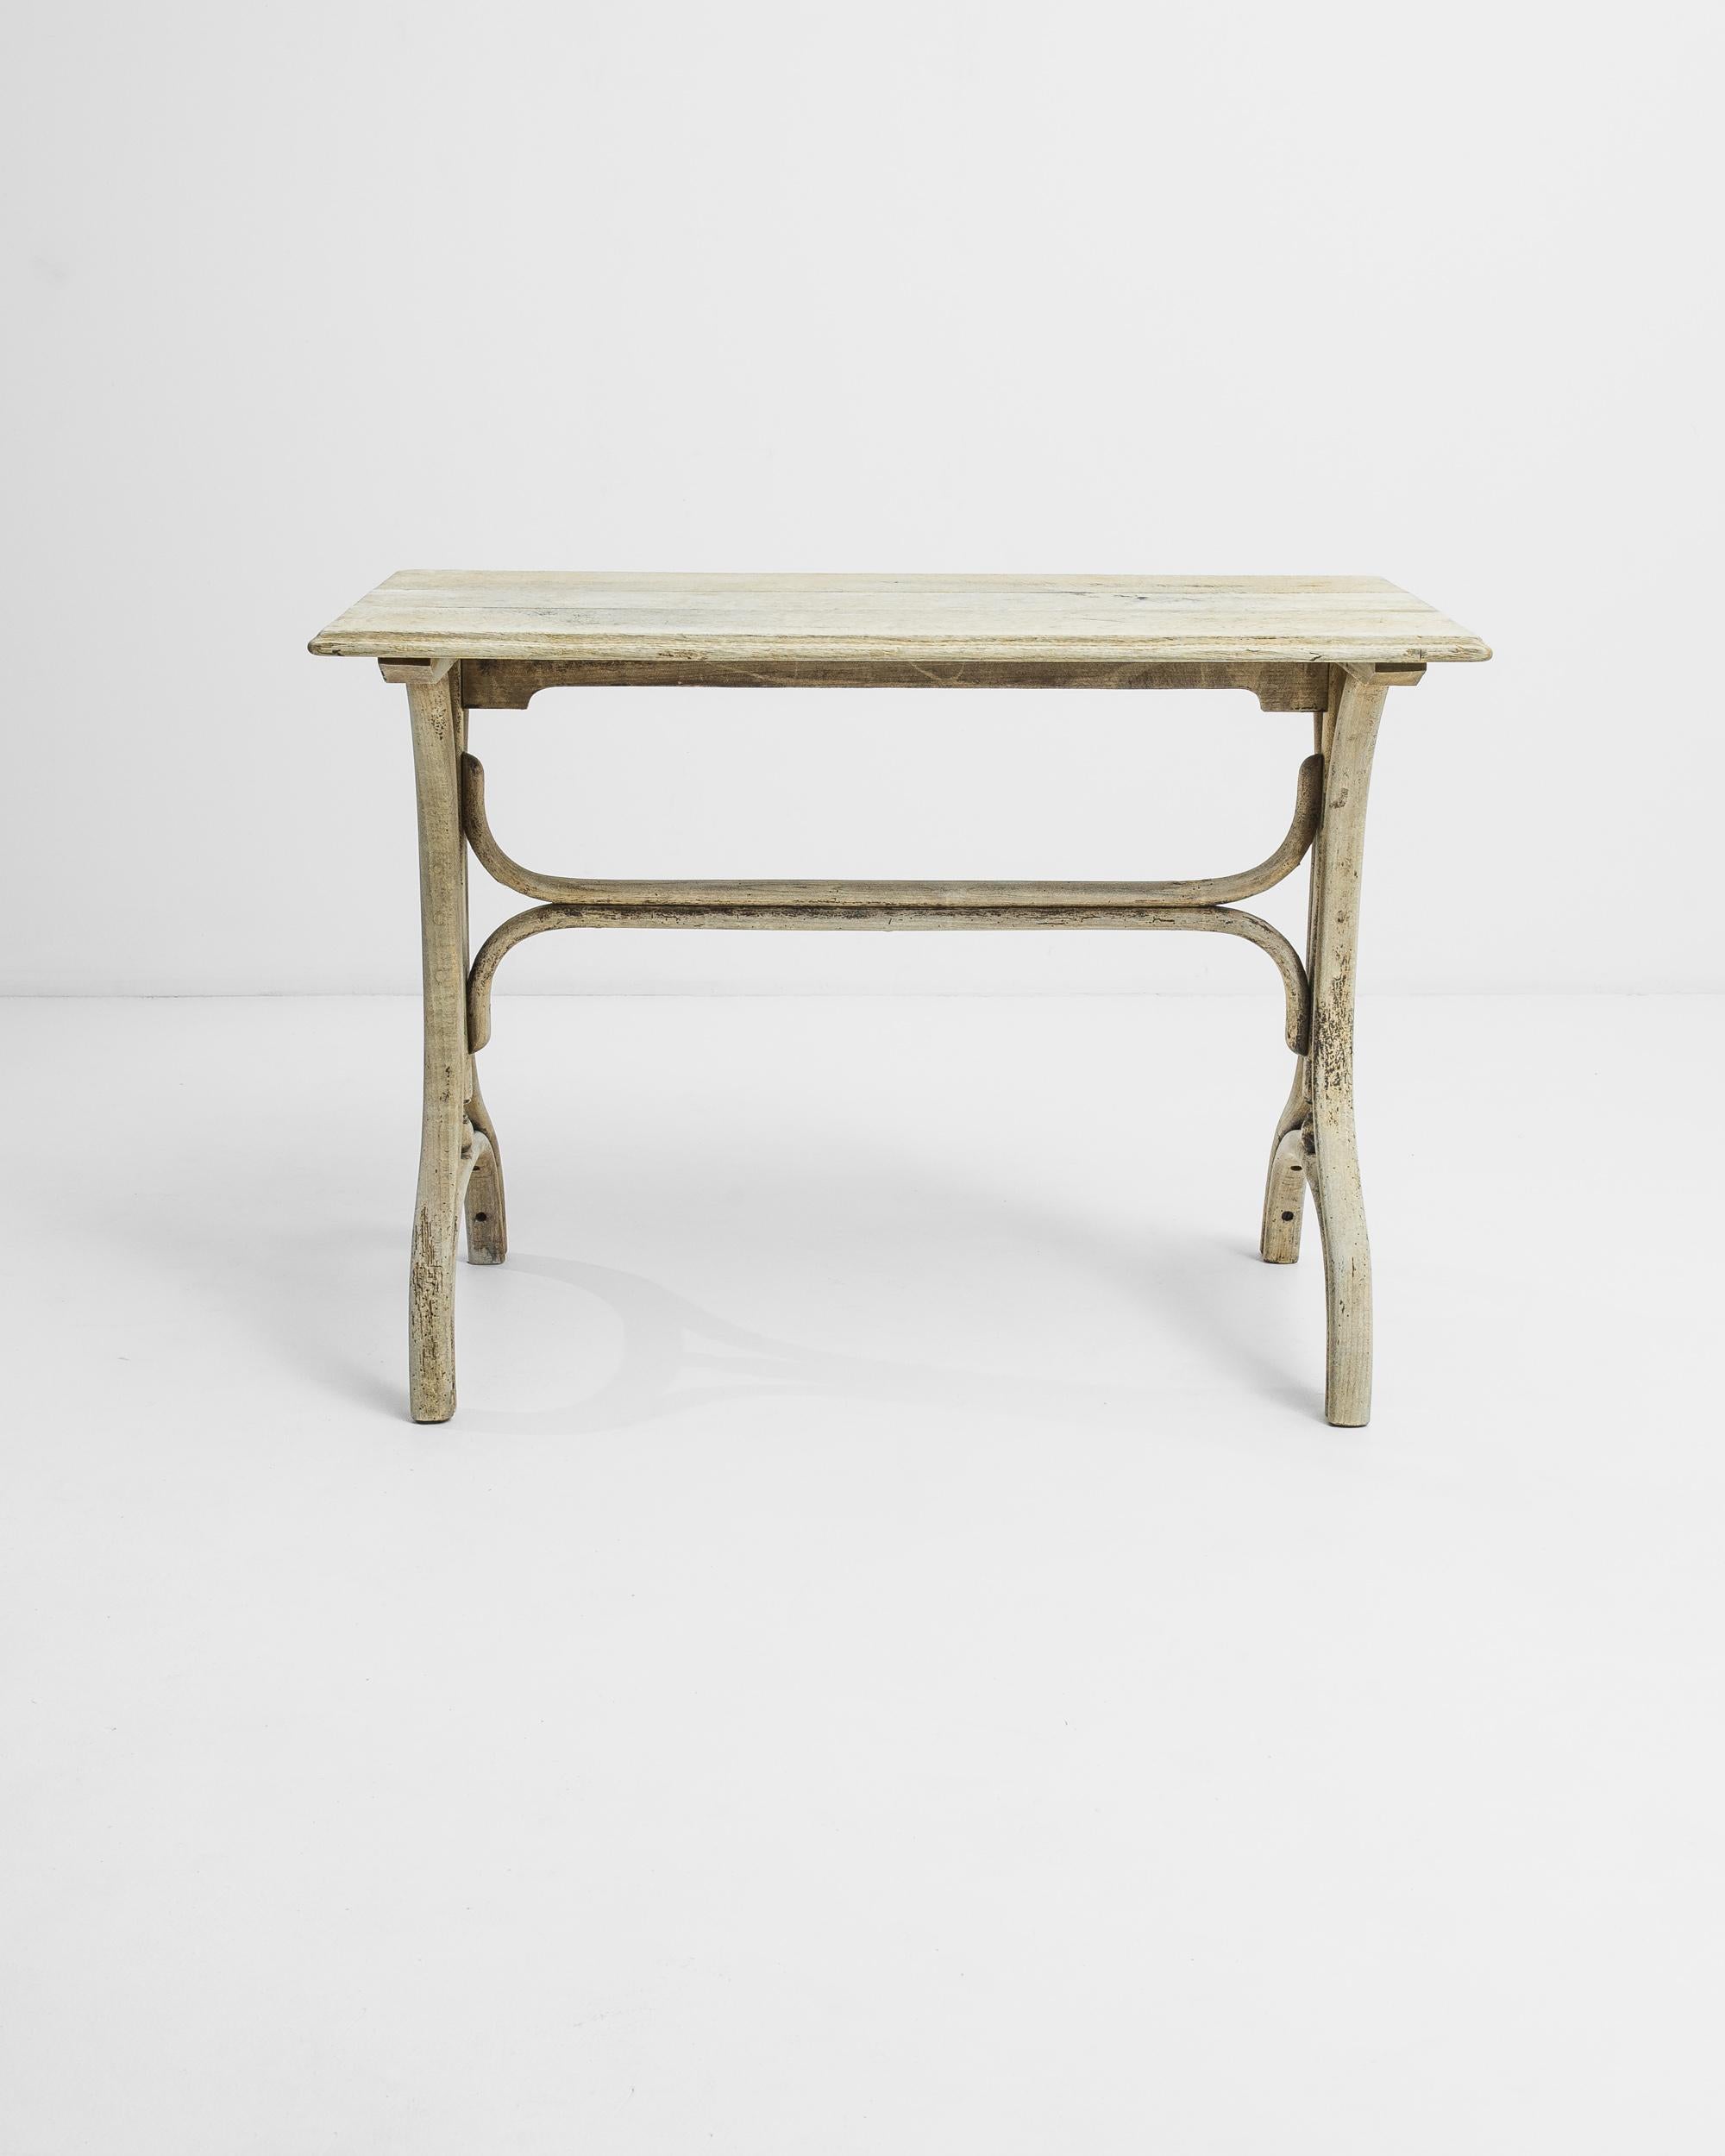 This occasional oak table was made in France circa 1920. The smooth tabletop is raised on the skillfully carved trestle base terminating in eccentric convex feet that playfully follow the smooth outline of the curved stretcher. The characteristic